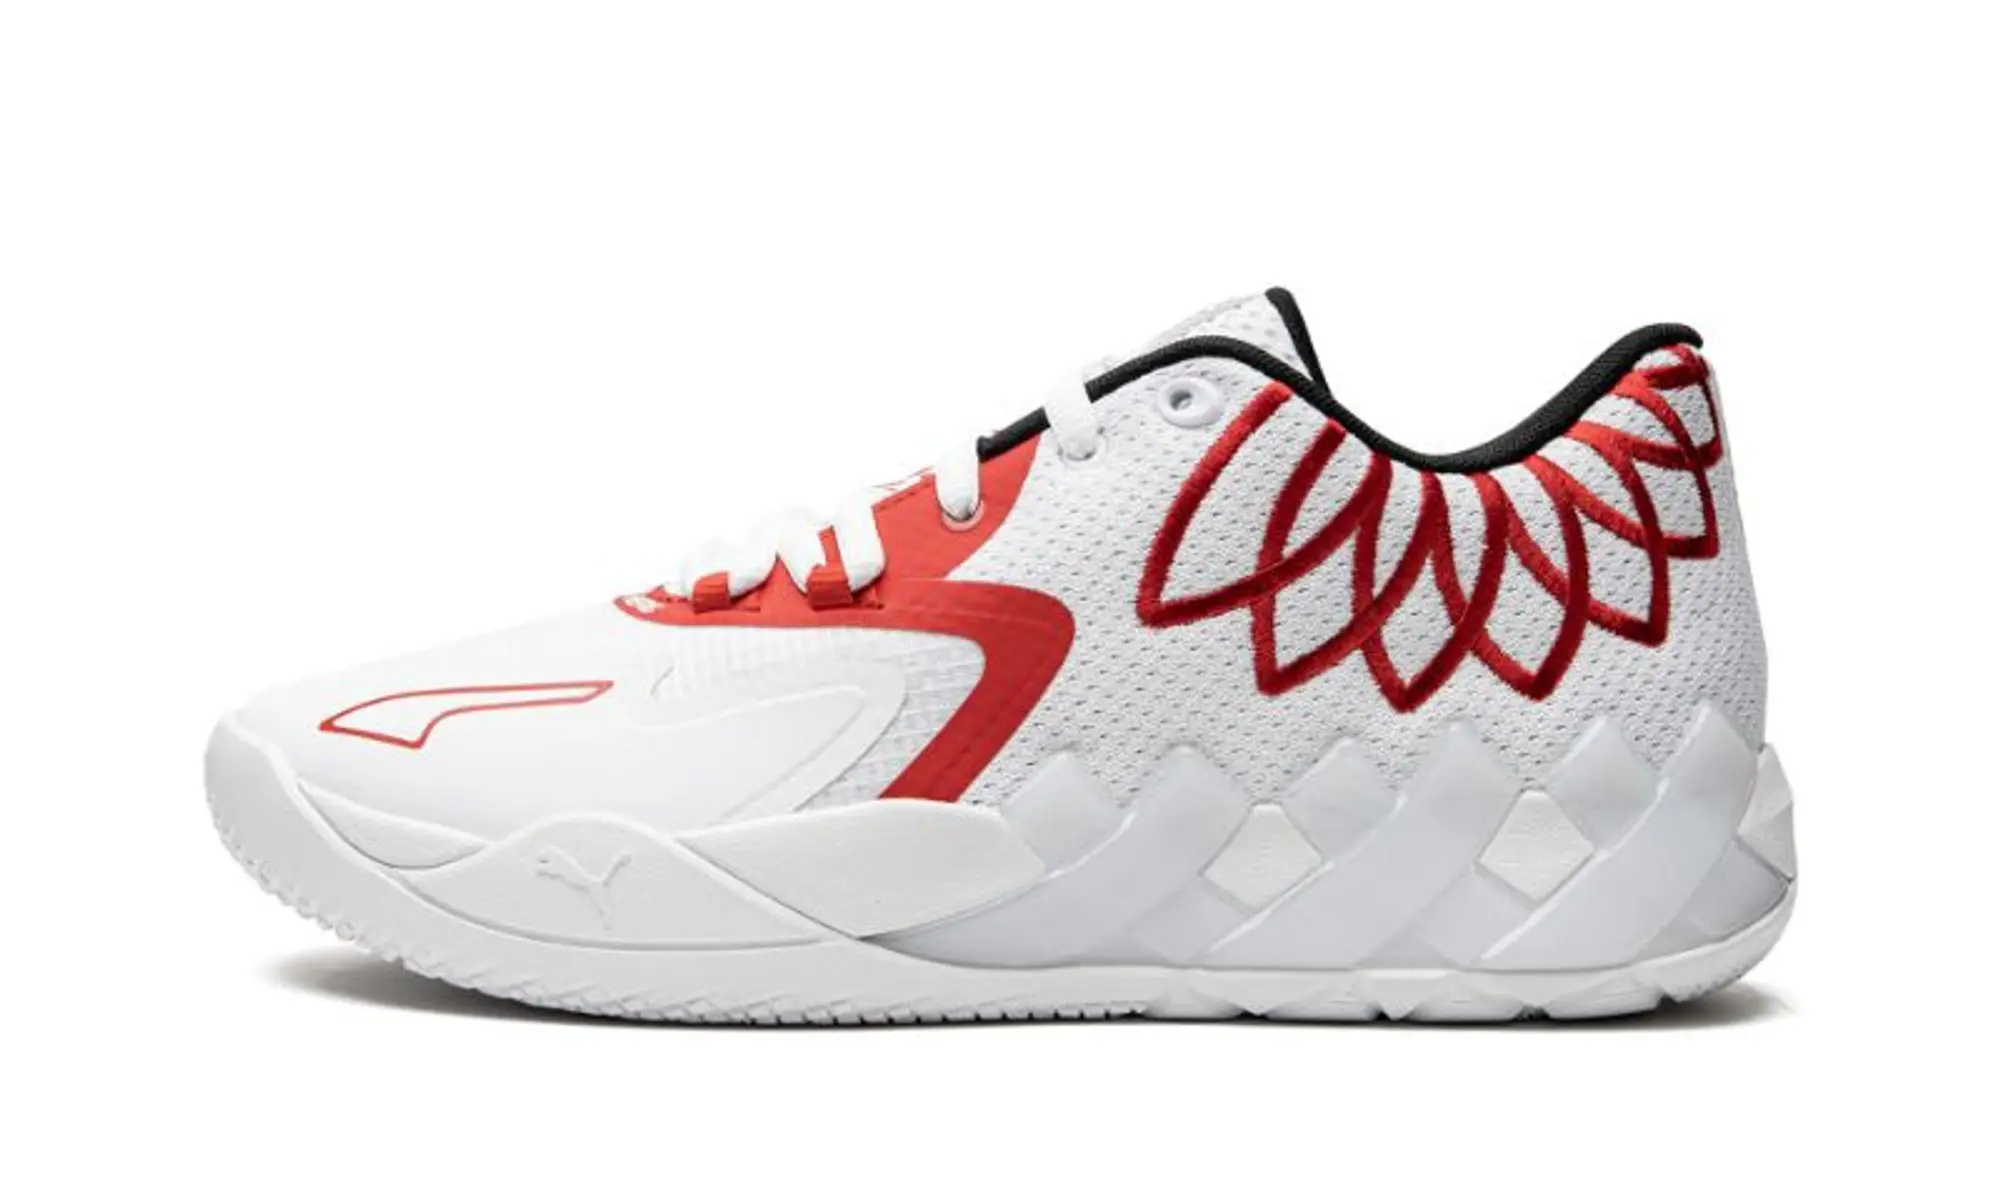 PUMA MB.01 Low Bright Red Shoes